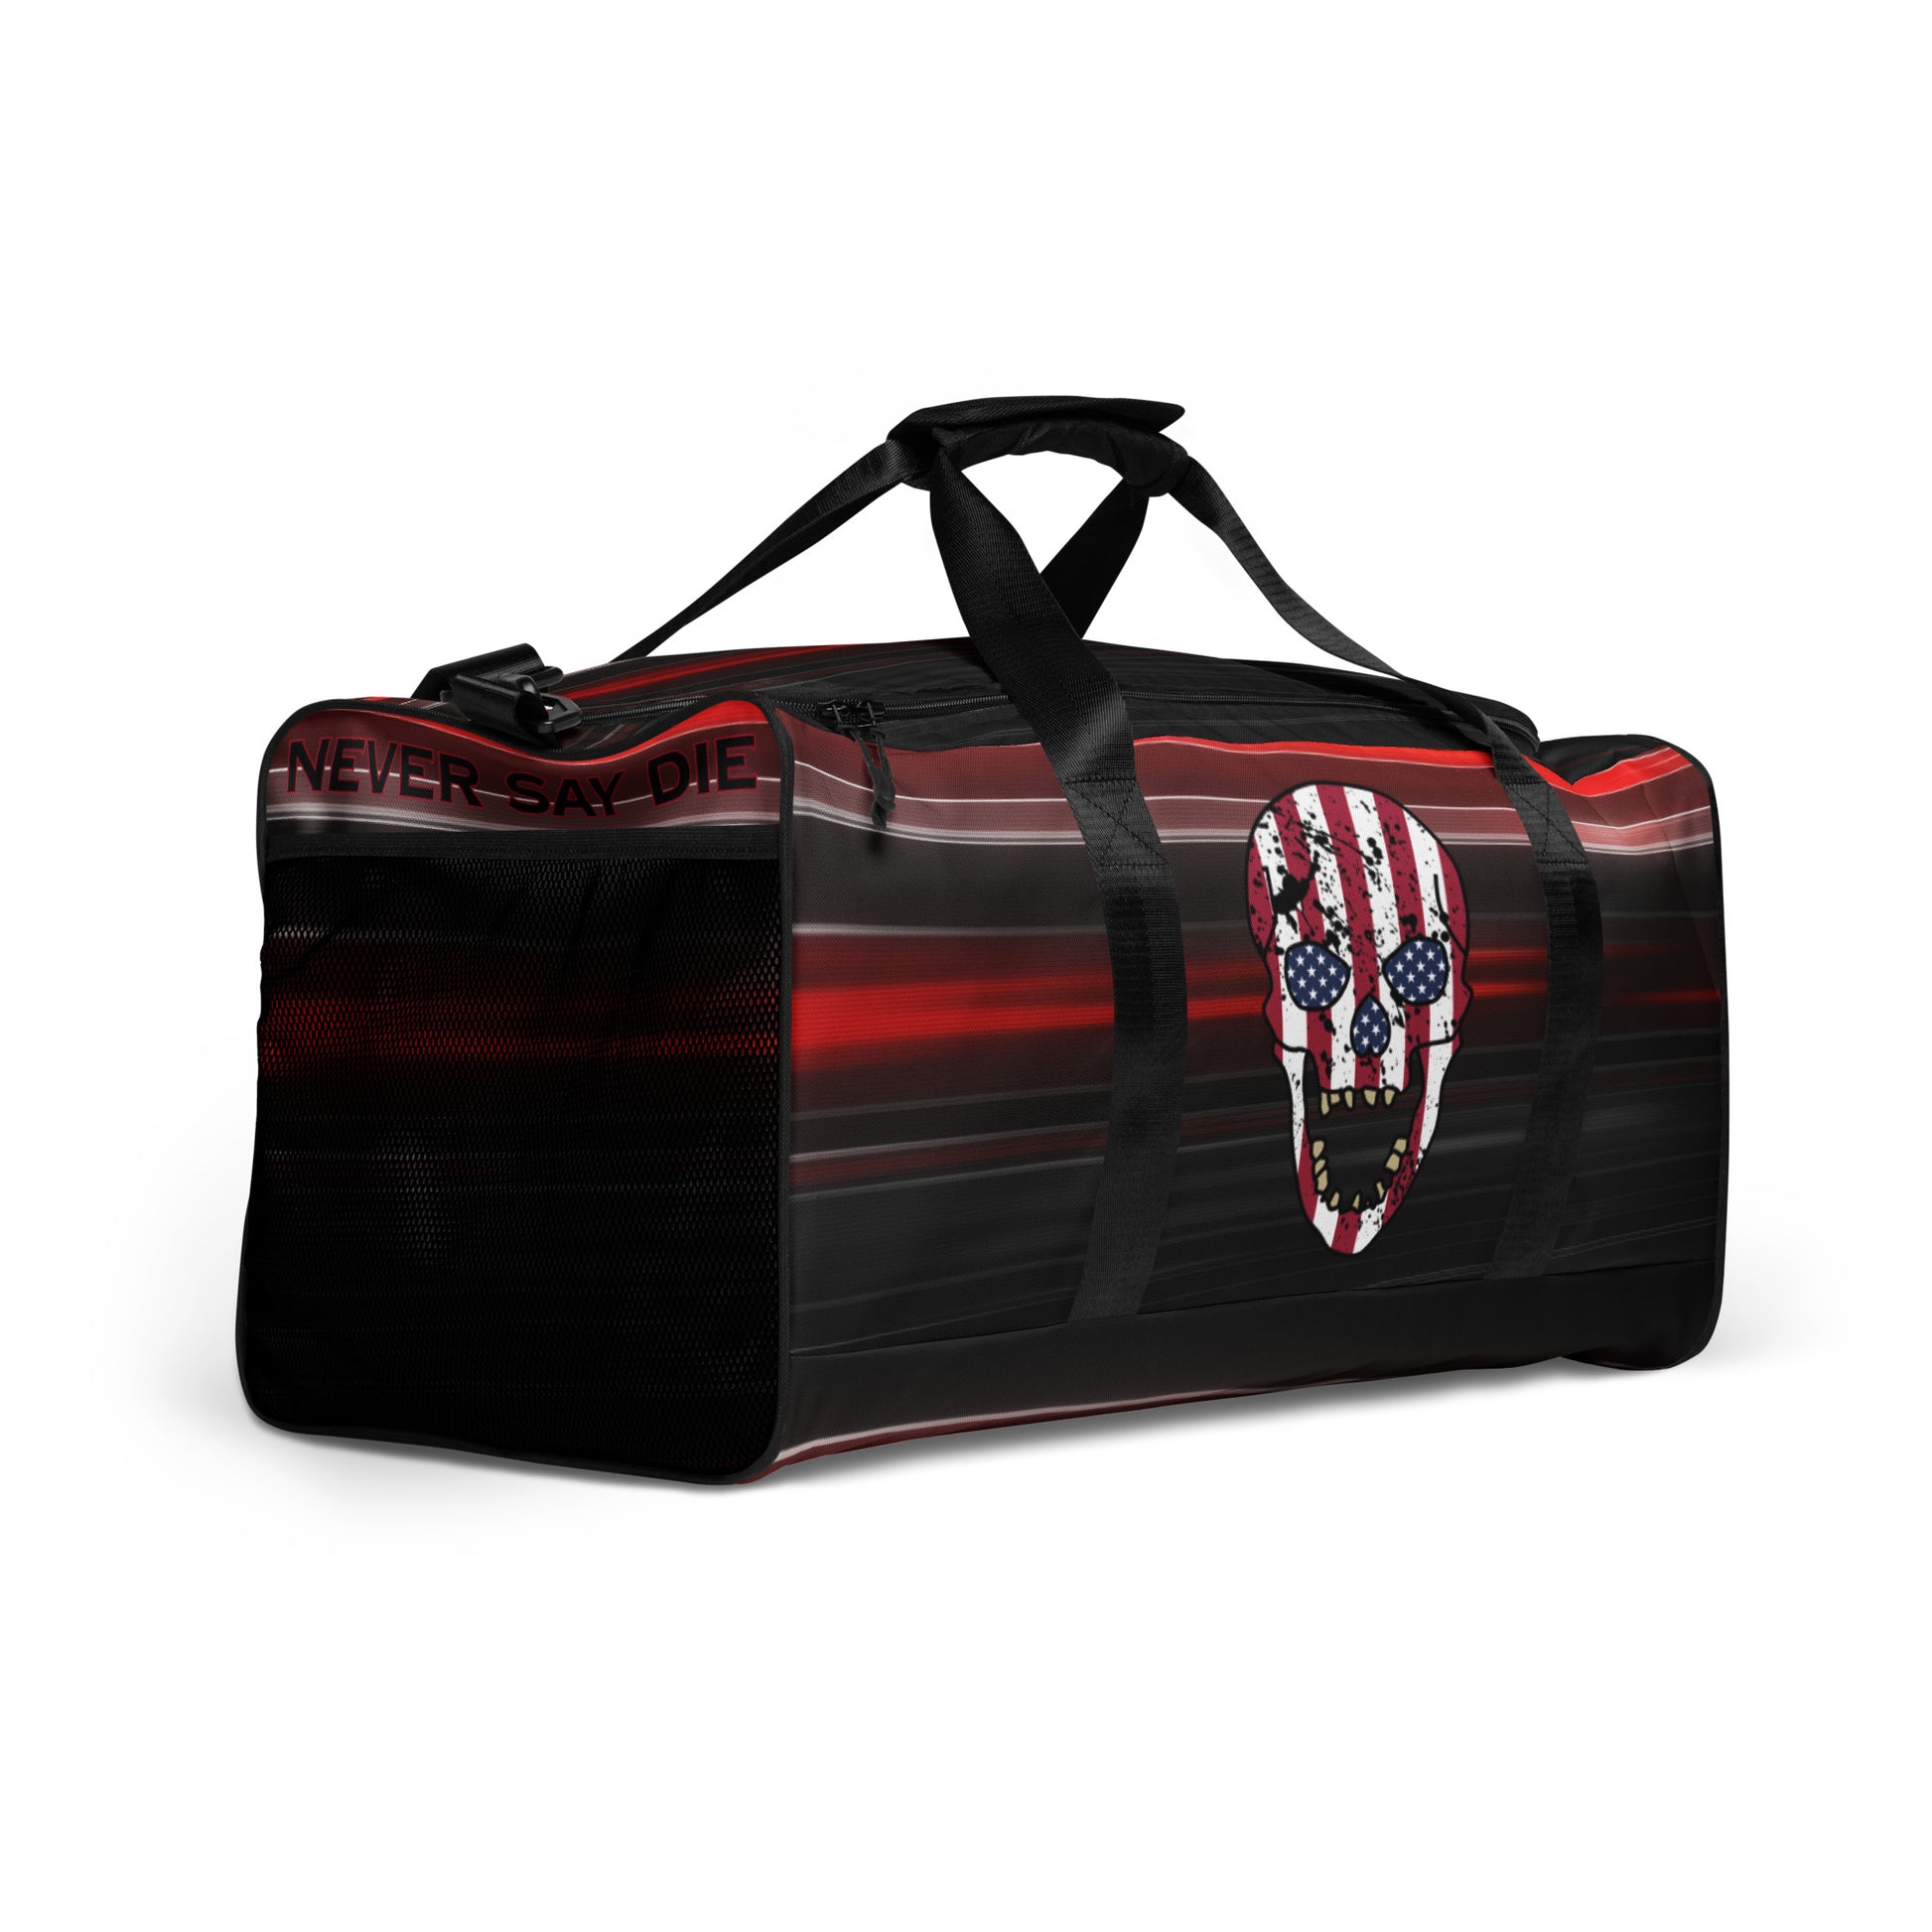 Never Say Die Gym Bag - Front Right